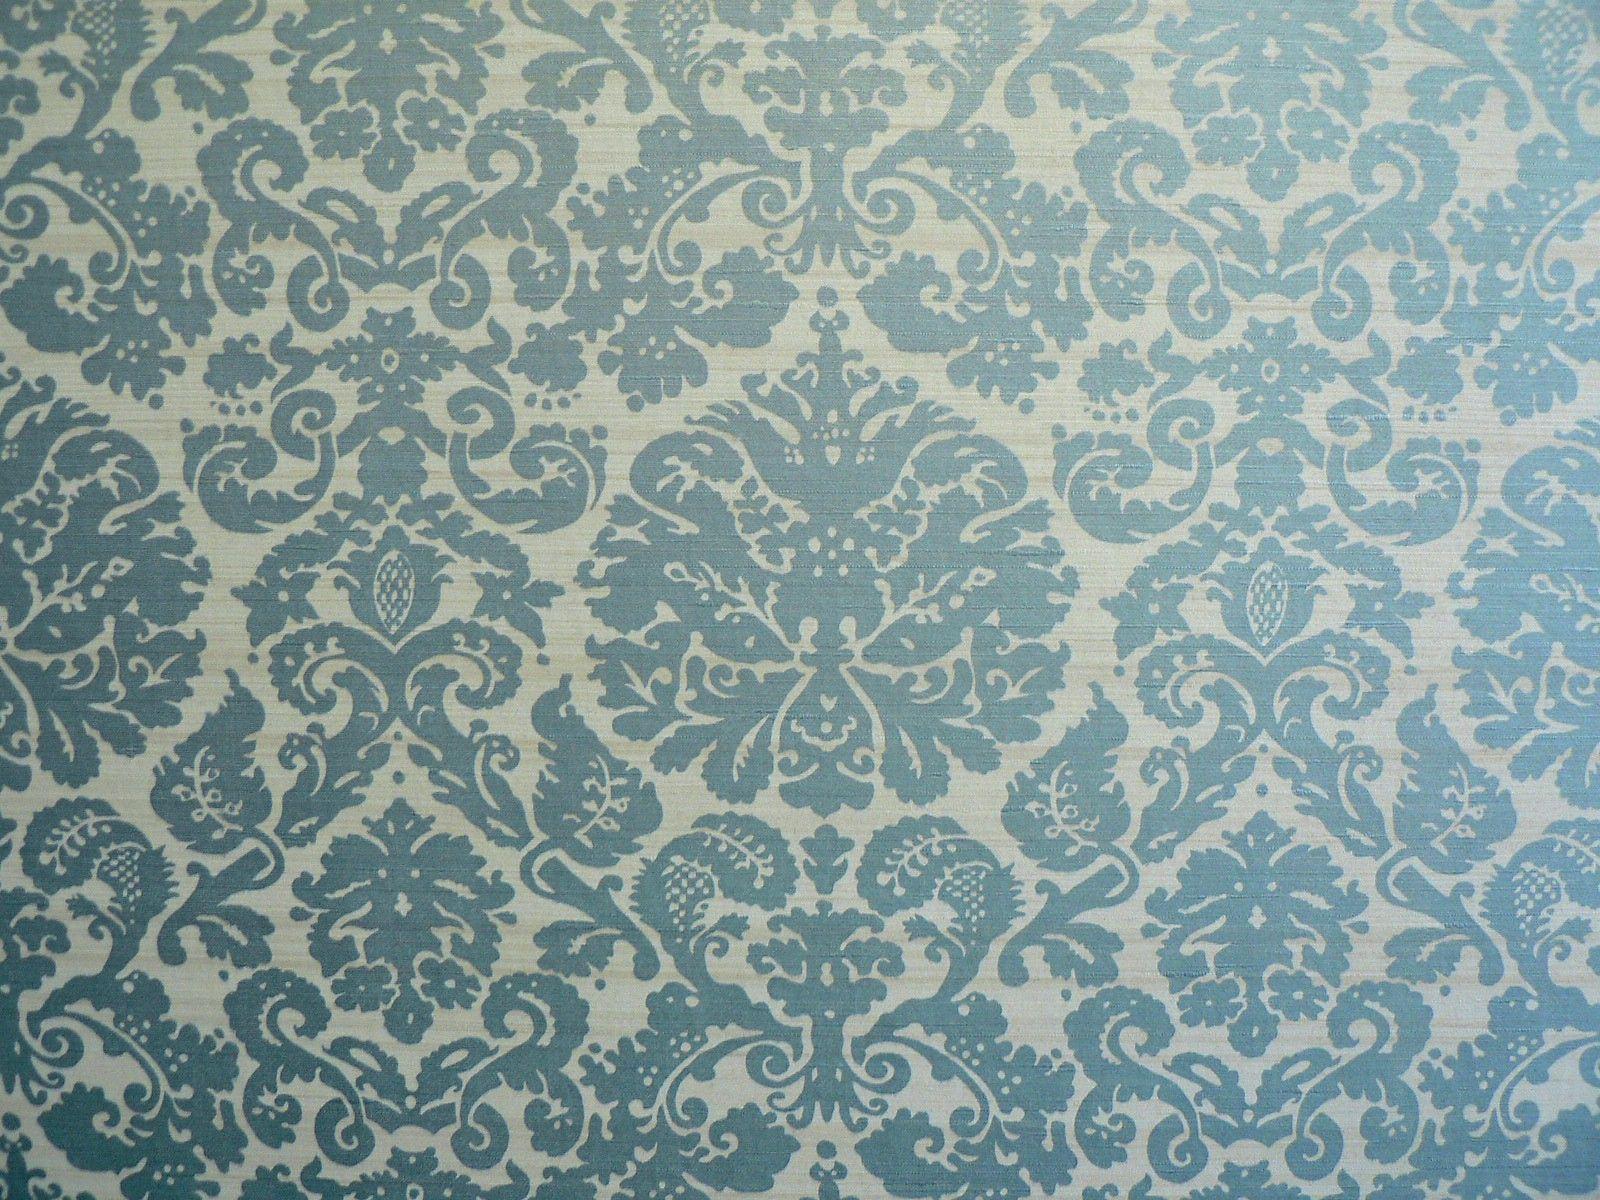 Vintage Wallpaper 45 15335 Wallpaper and Background